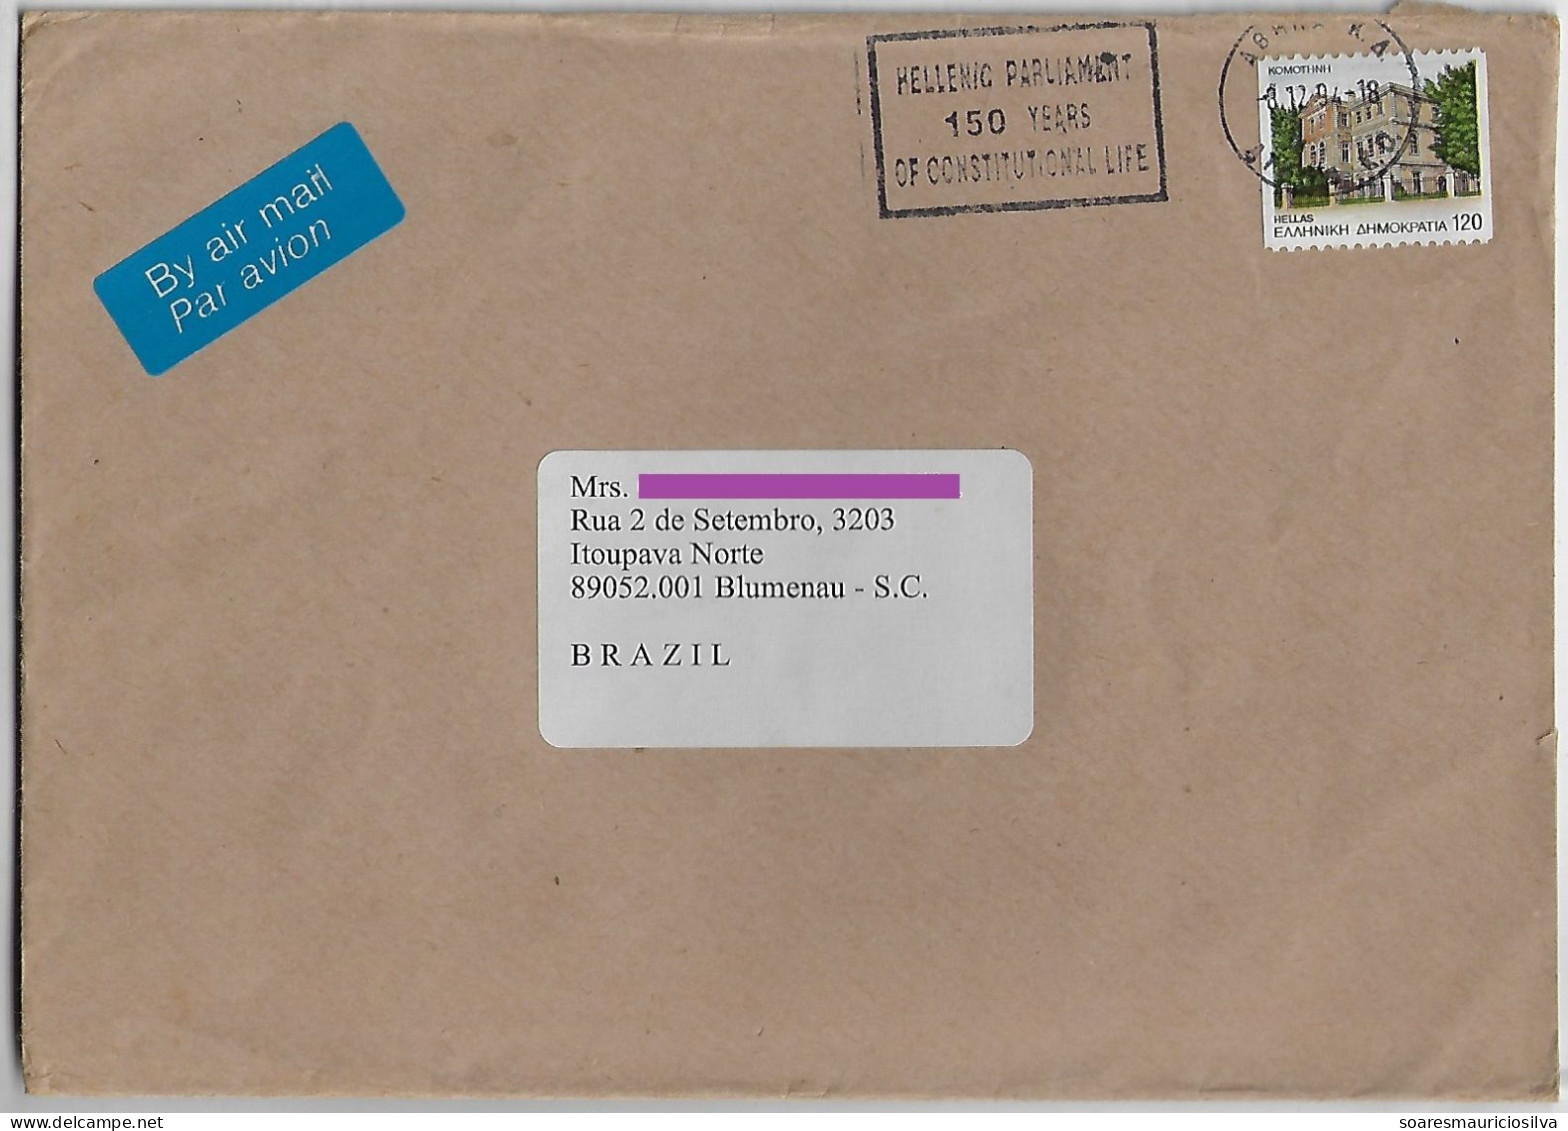 Greece 1994 Airmail Cover Athens To Brazil Stamp Komotini Cancel Hellenic Parliament 150 Years Of Constitucional Life - Cartas & Documentos